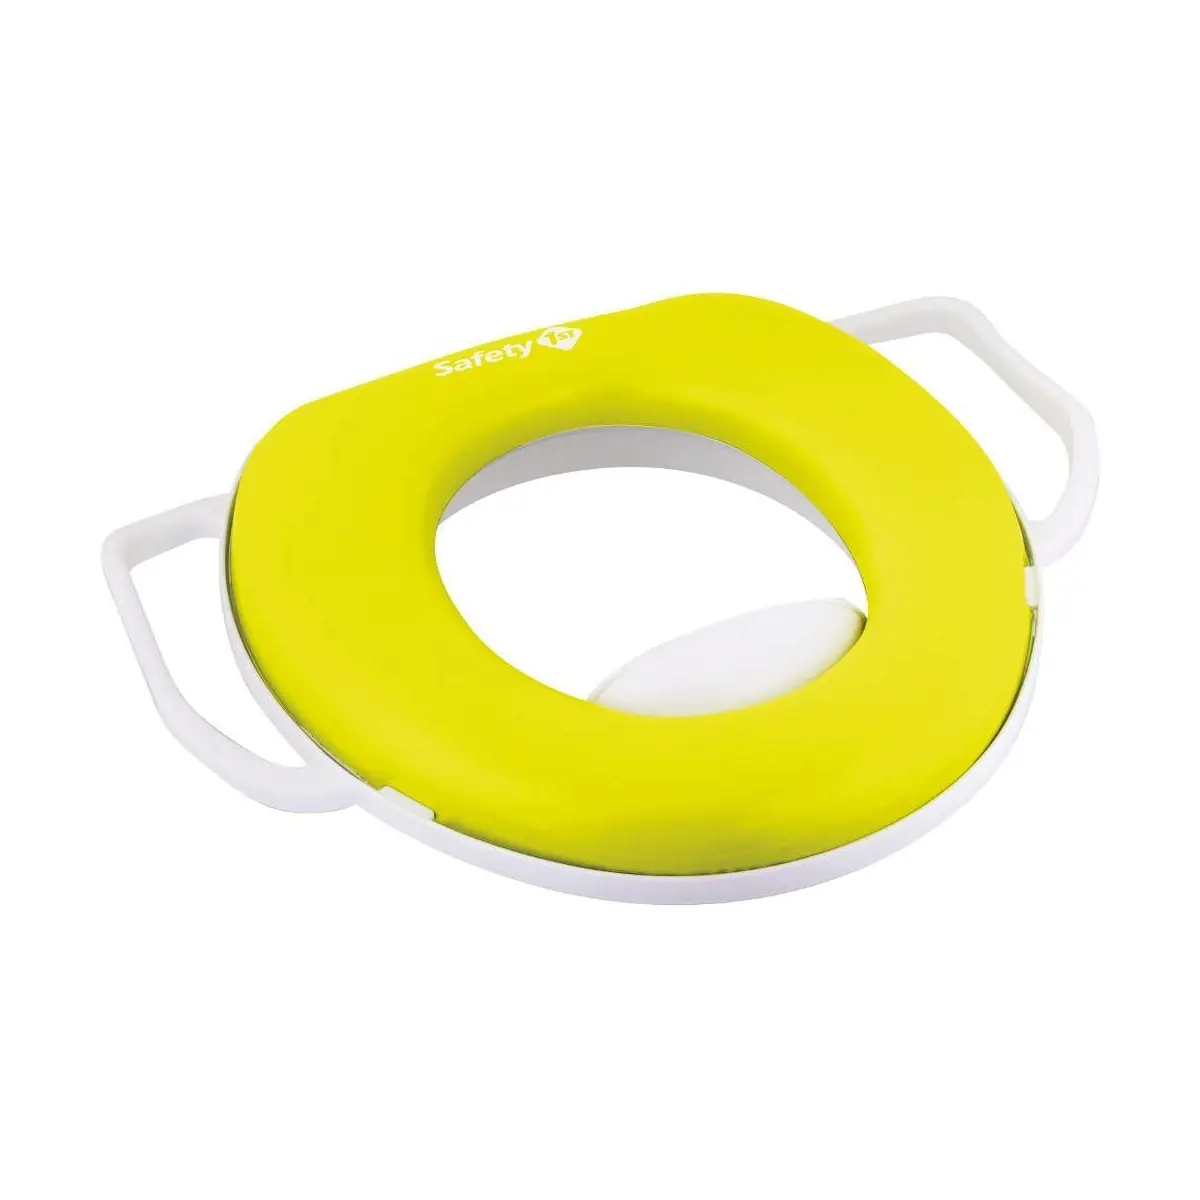 Safety 1st Comfort Potty Training Seat – Lime (CL)